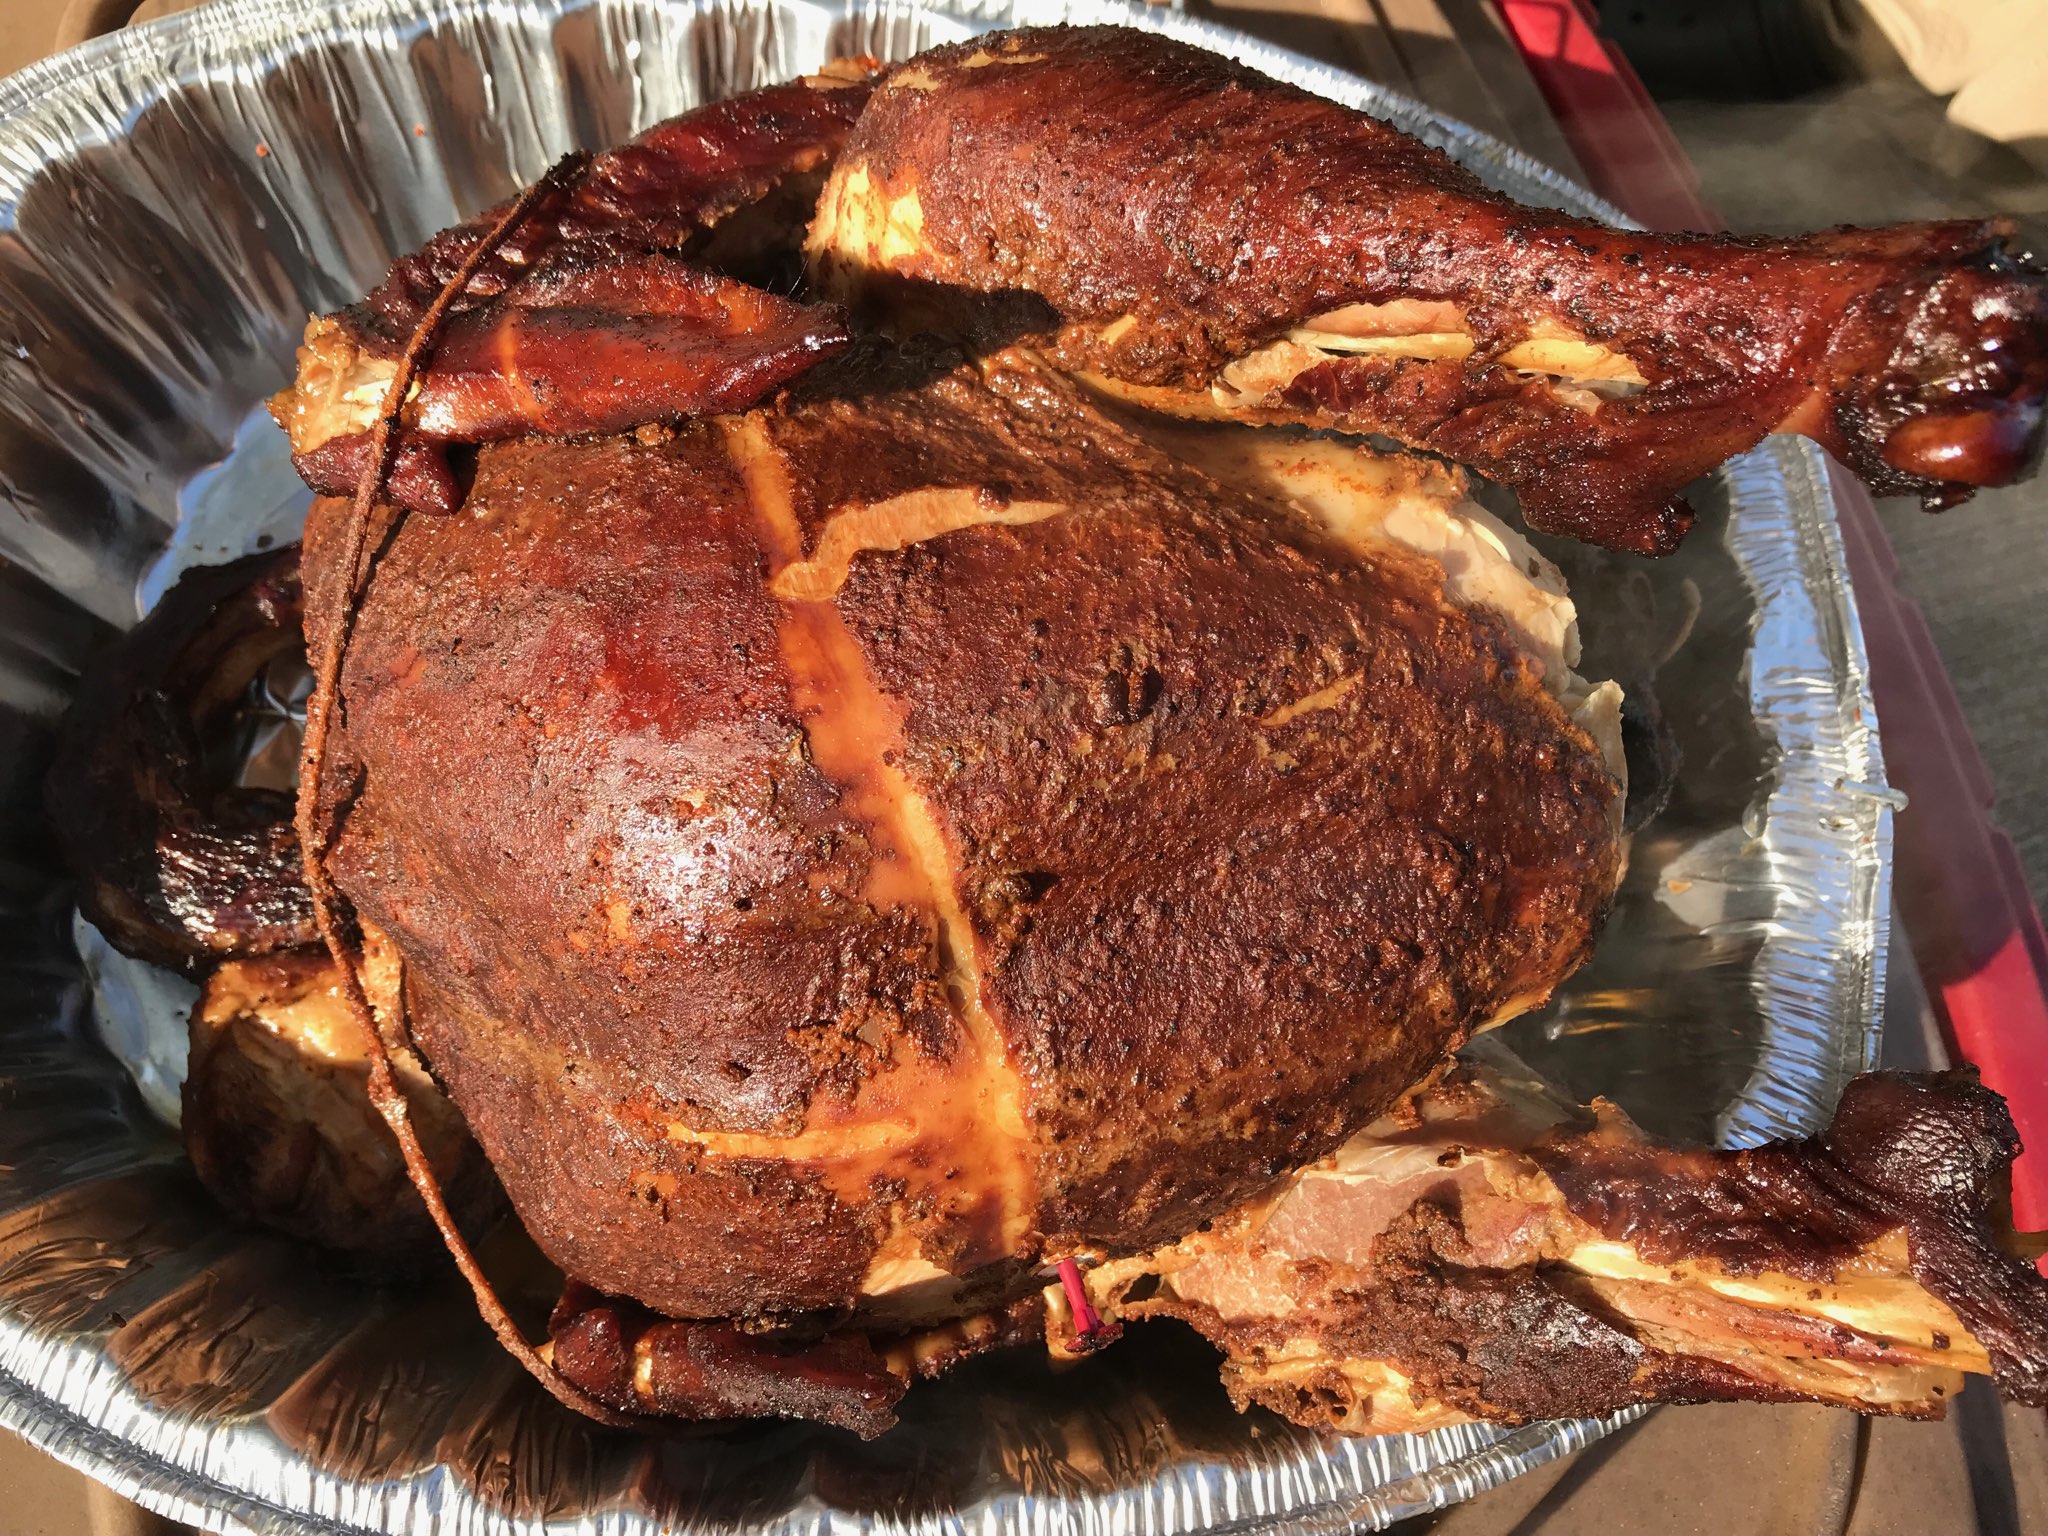 The Best Smoked Turkey Recipe for Thanksgiving